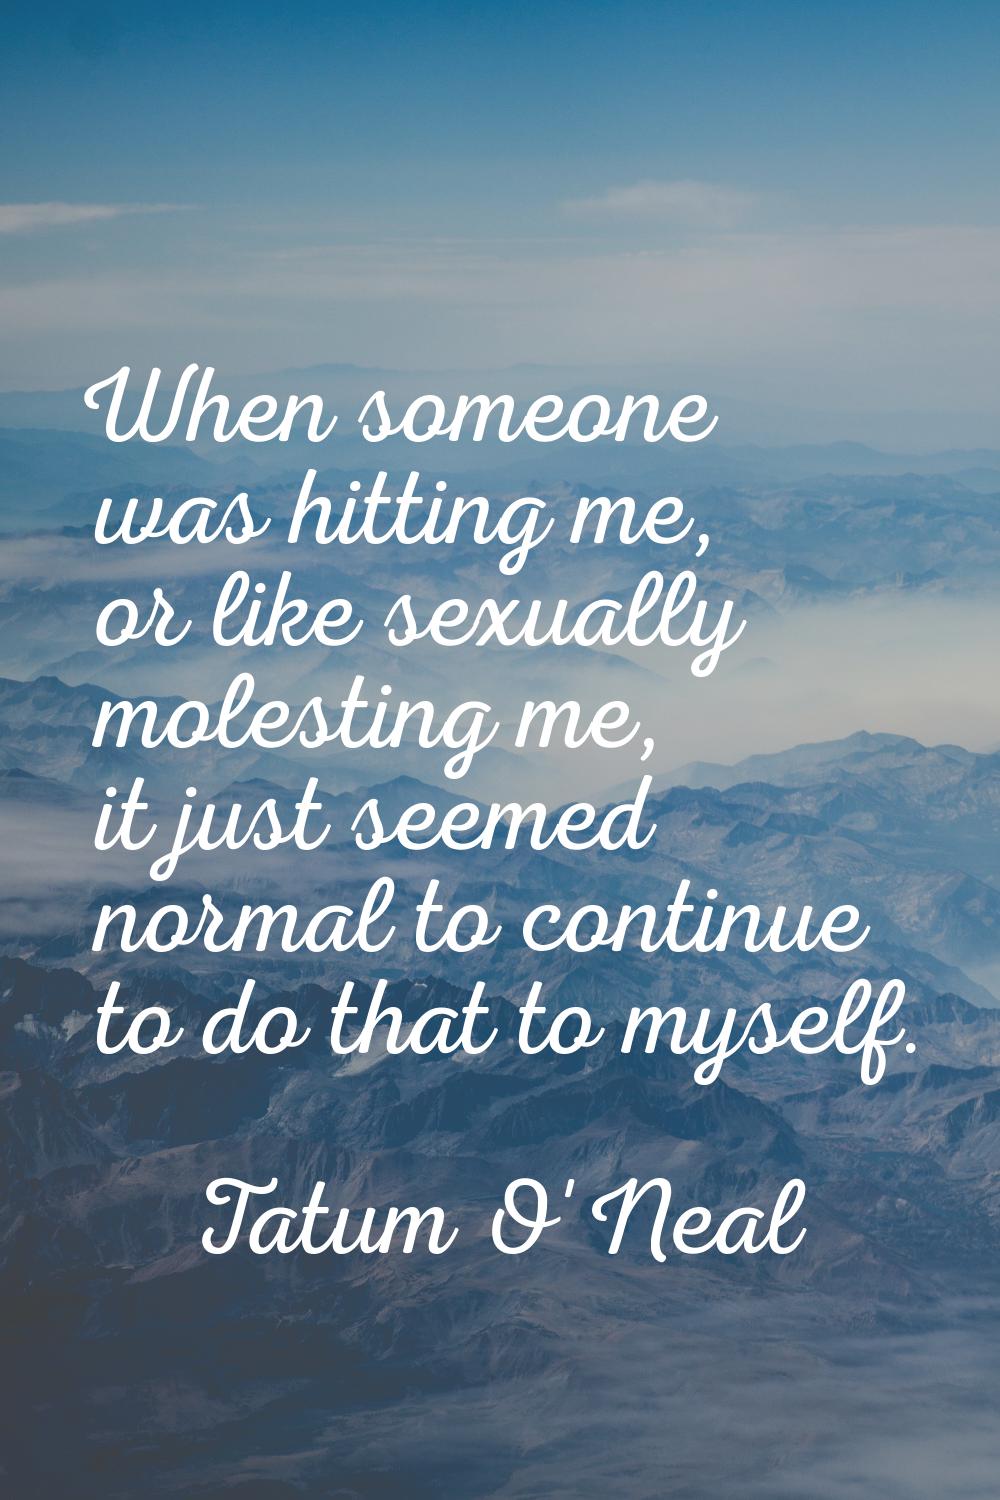 When someone was hitting me, or like sexually molesting me, it just seemed normal to continue to do